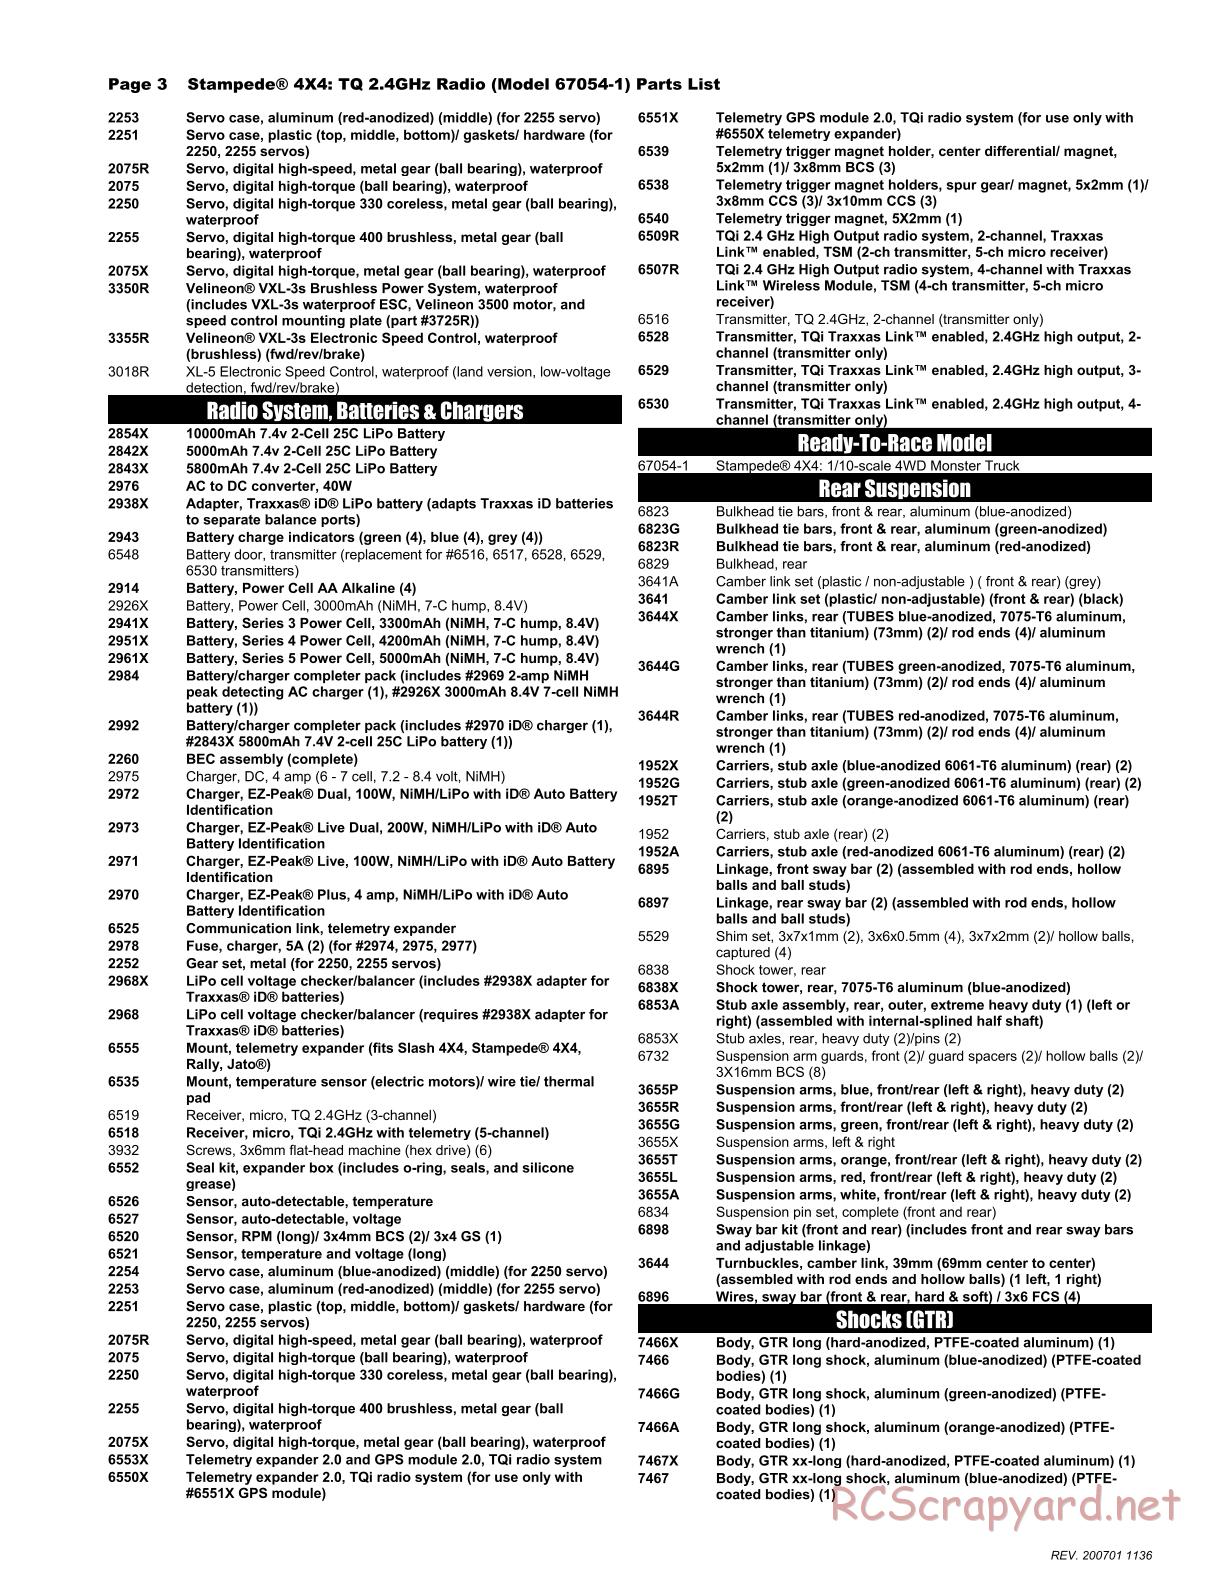 Traxxas - Stampede 4x4 - Parts List - Page 3